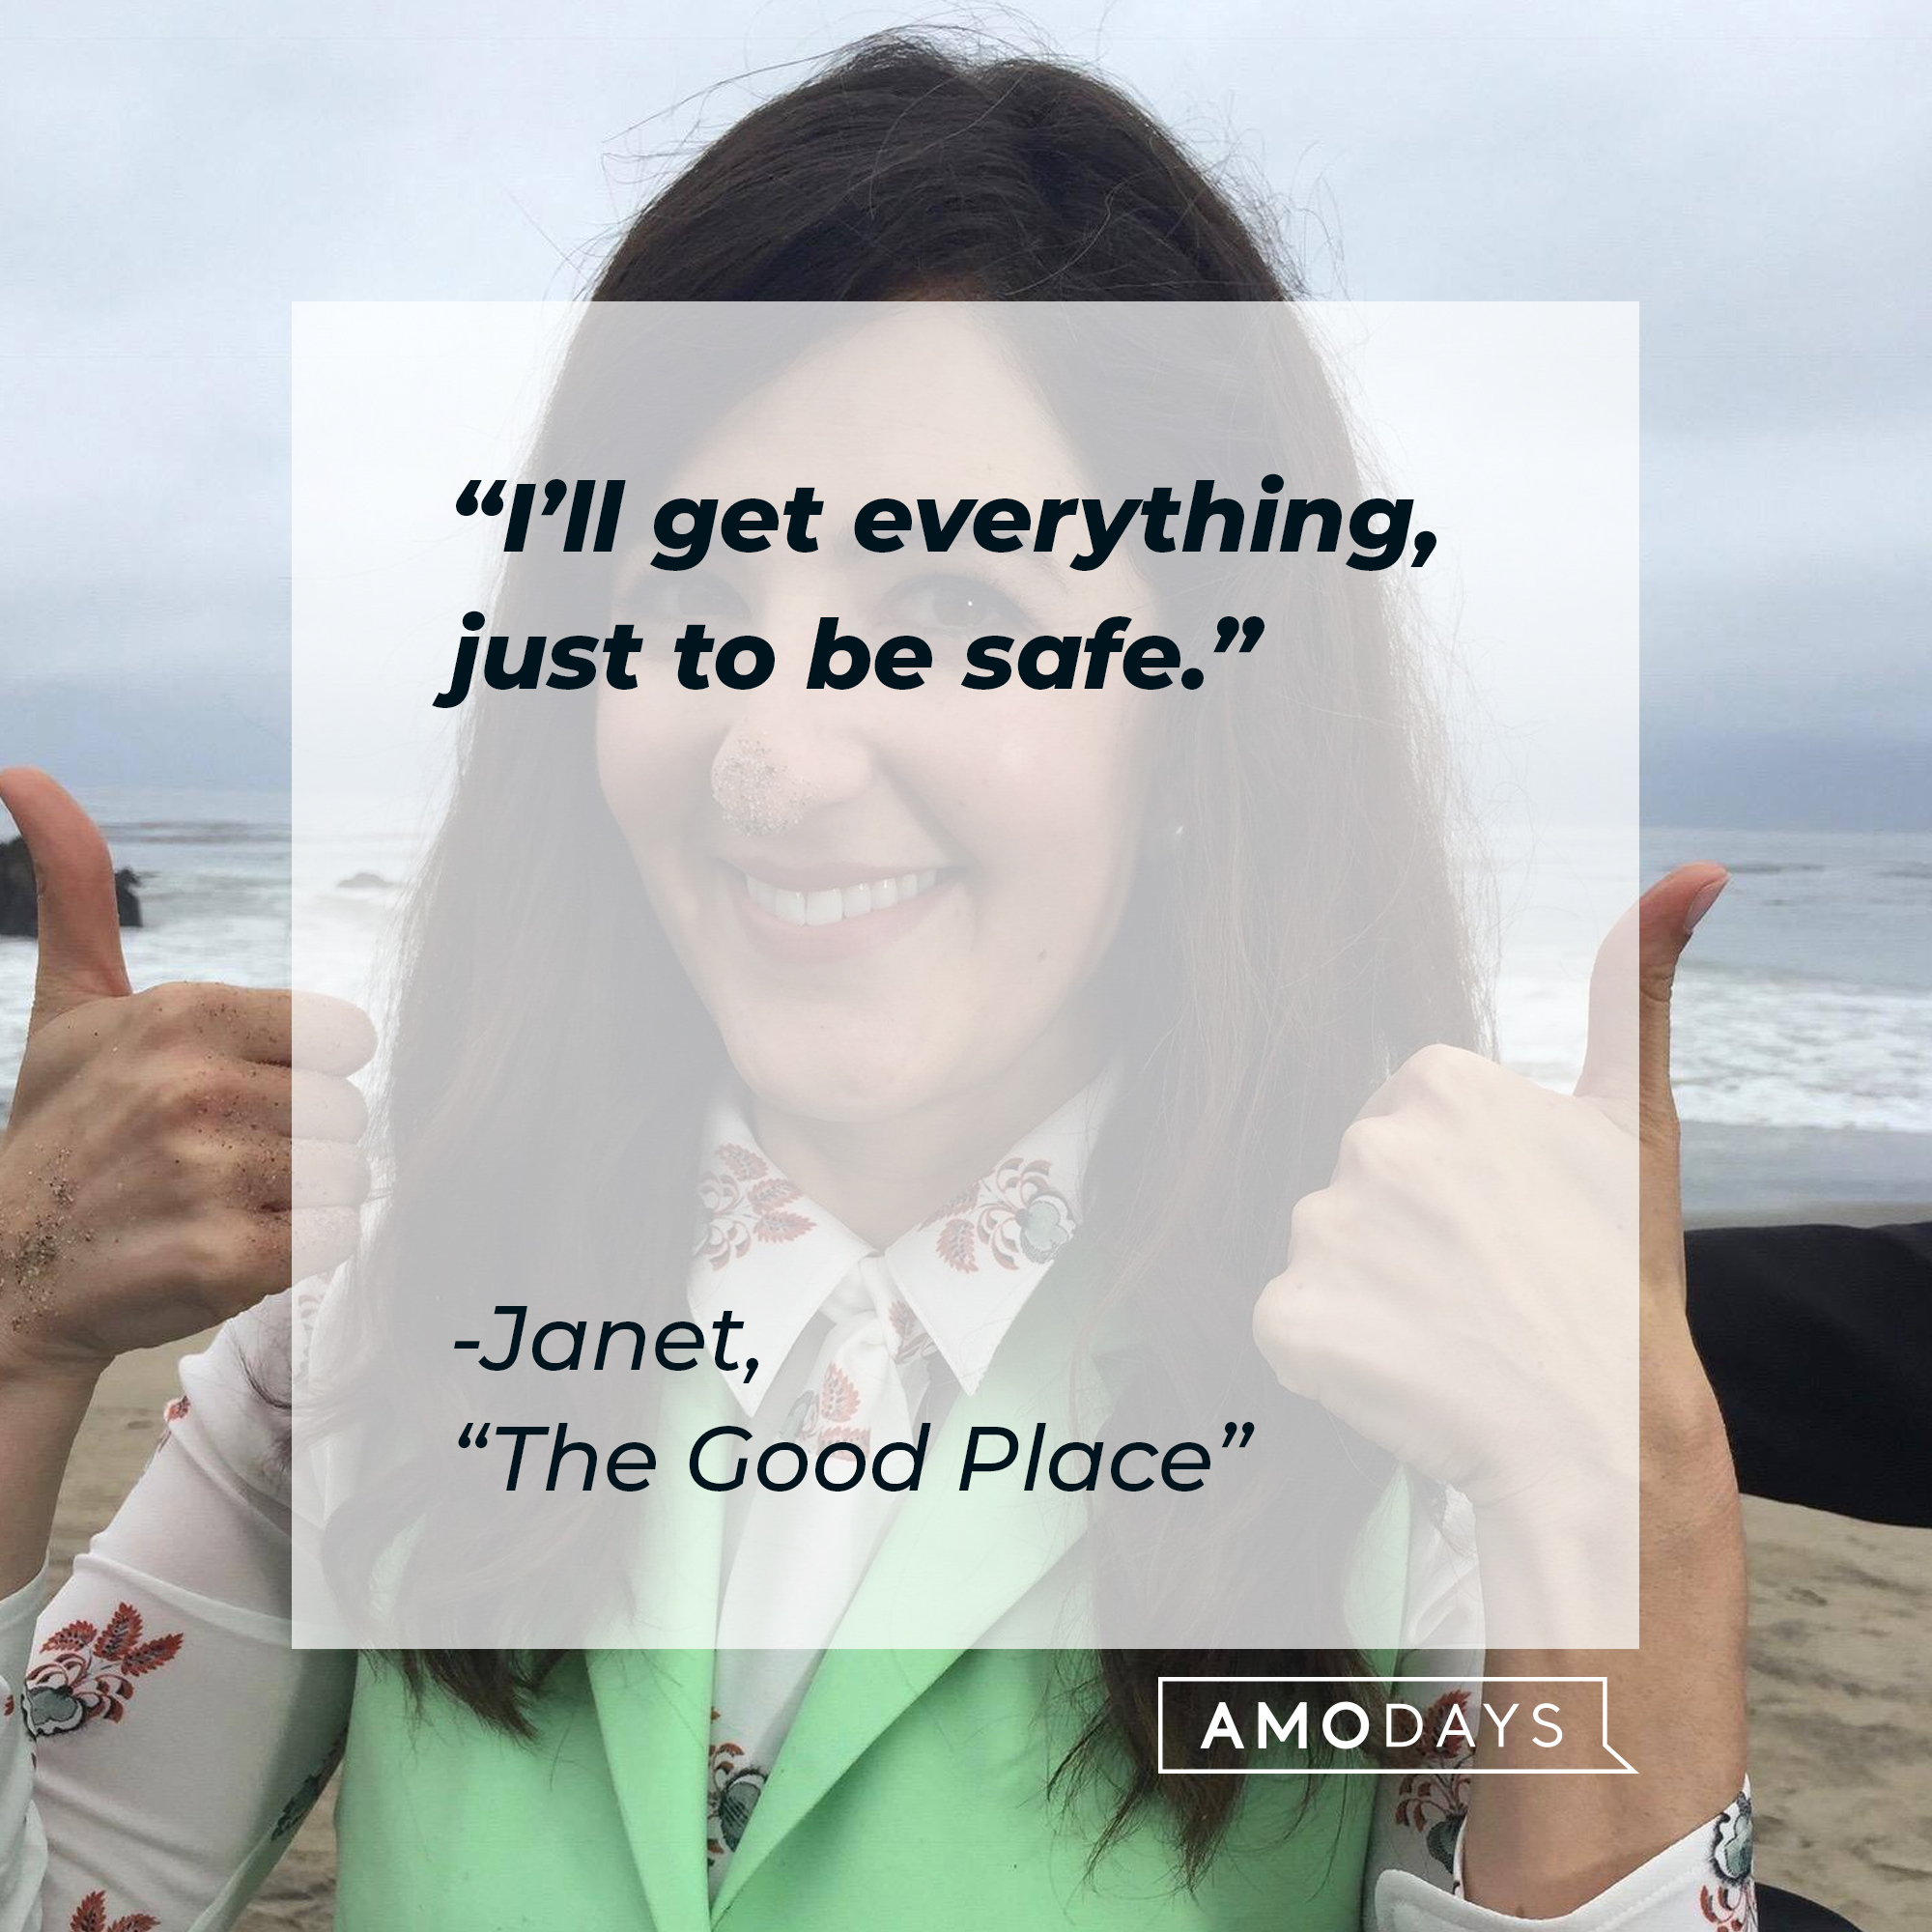 Janet's quote: “I’ll get everything, just to be safe.” | Source: facebook.com/NBCTheGoodPlace